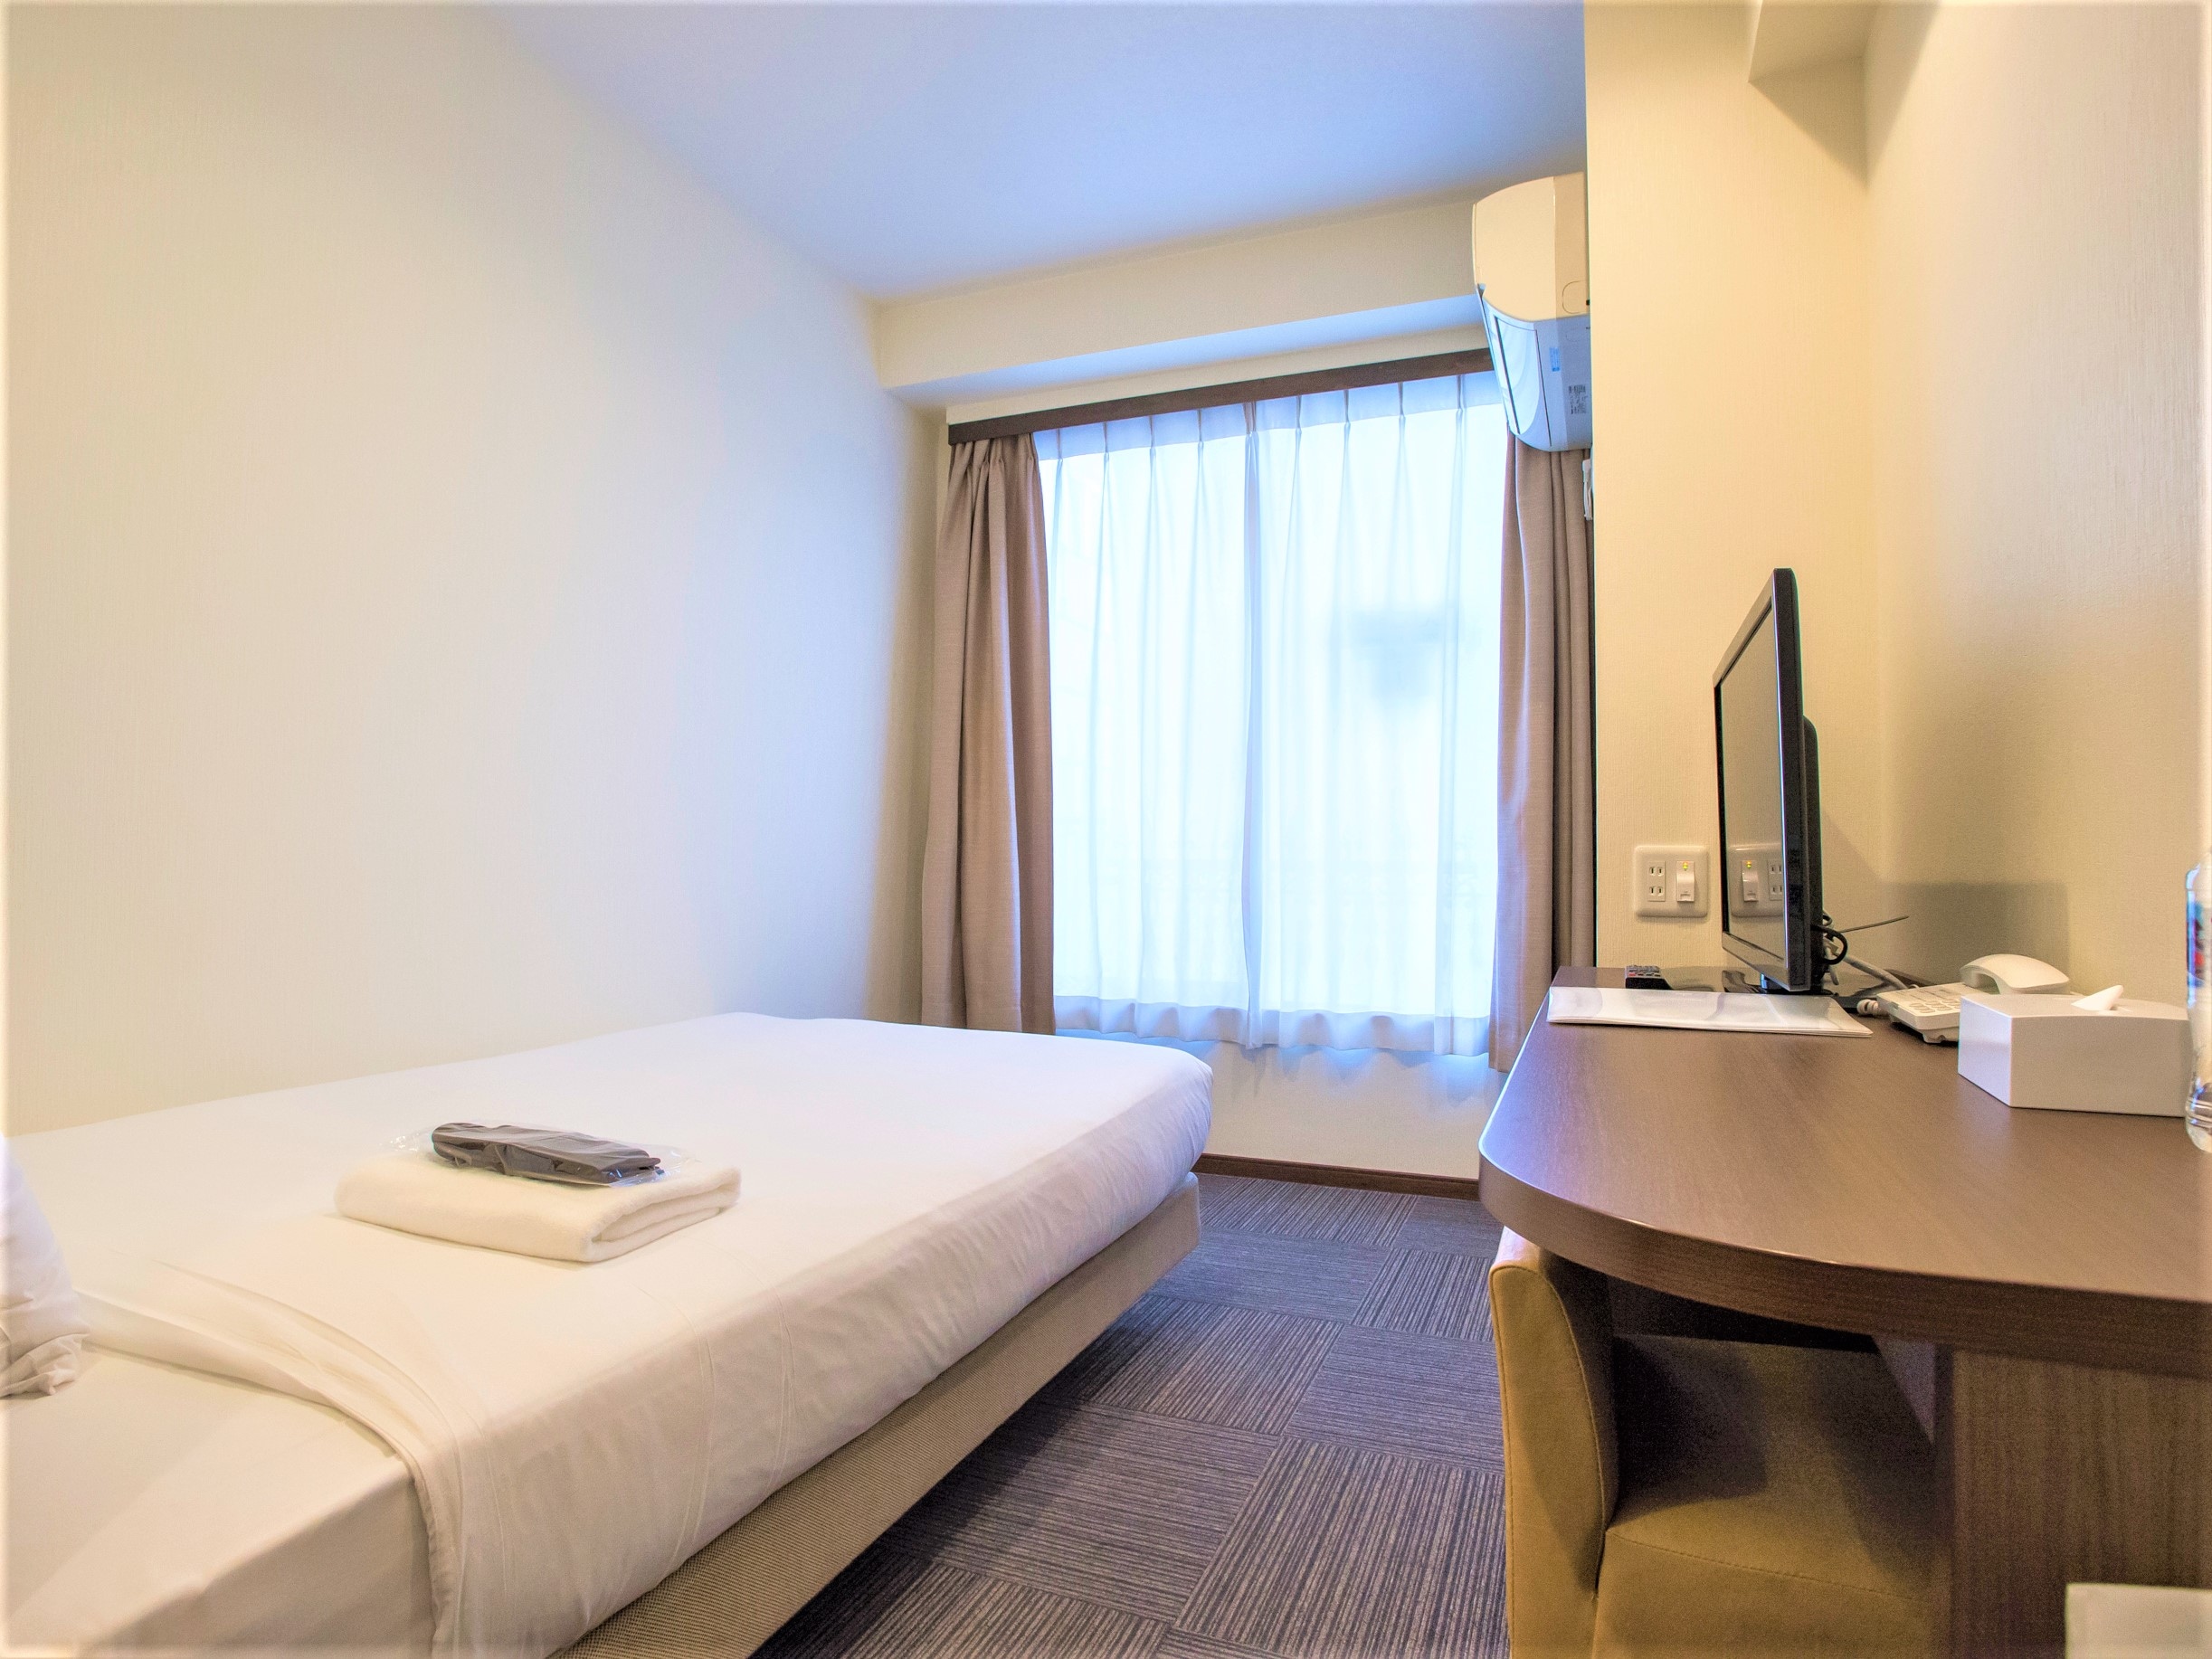 Single room size 8㎡-9㎡, all rooms are made by Simmons ♪ All rooms are equipped with washlets ♪